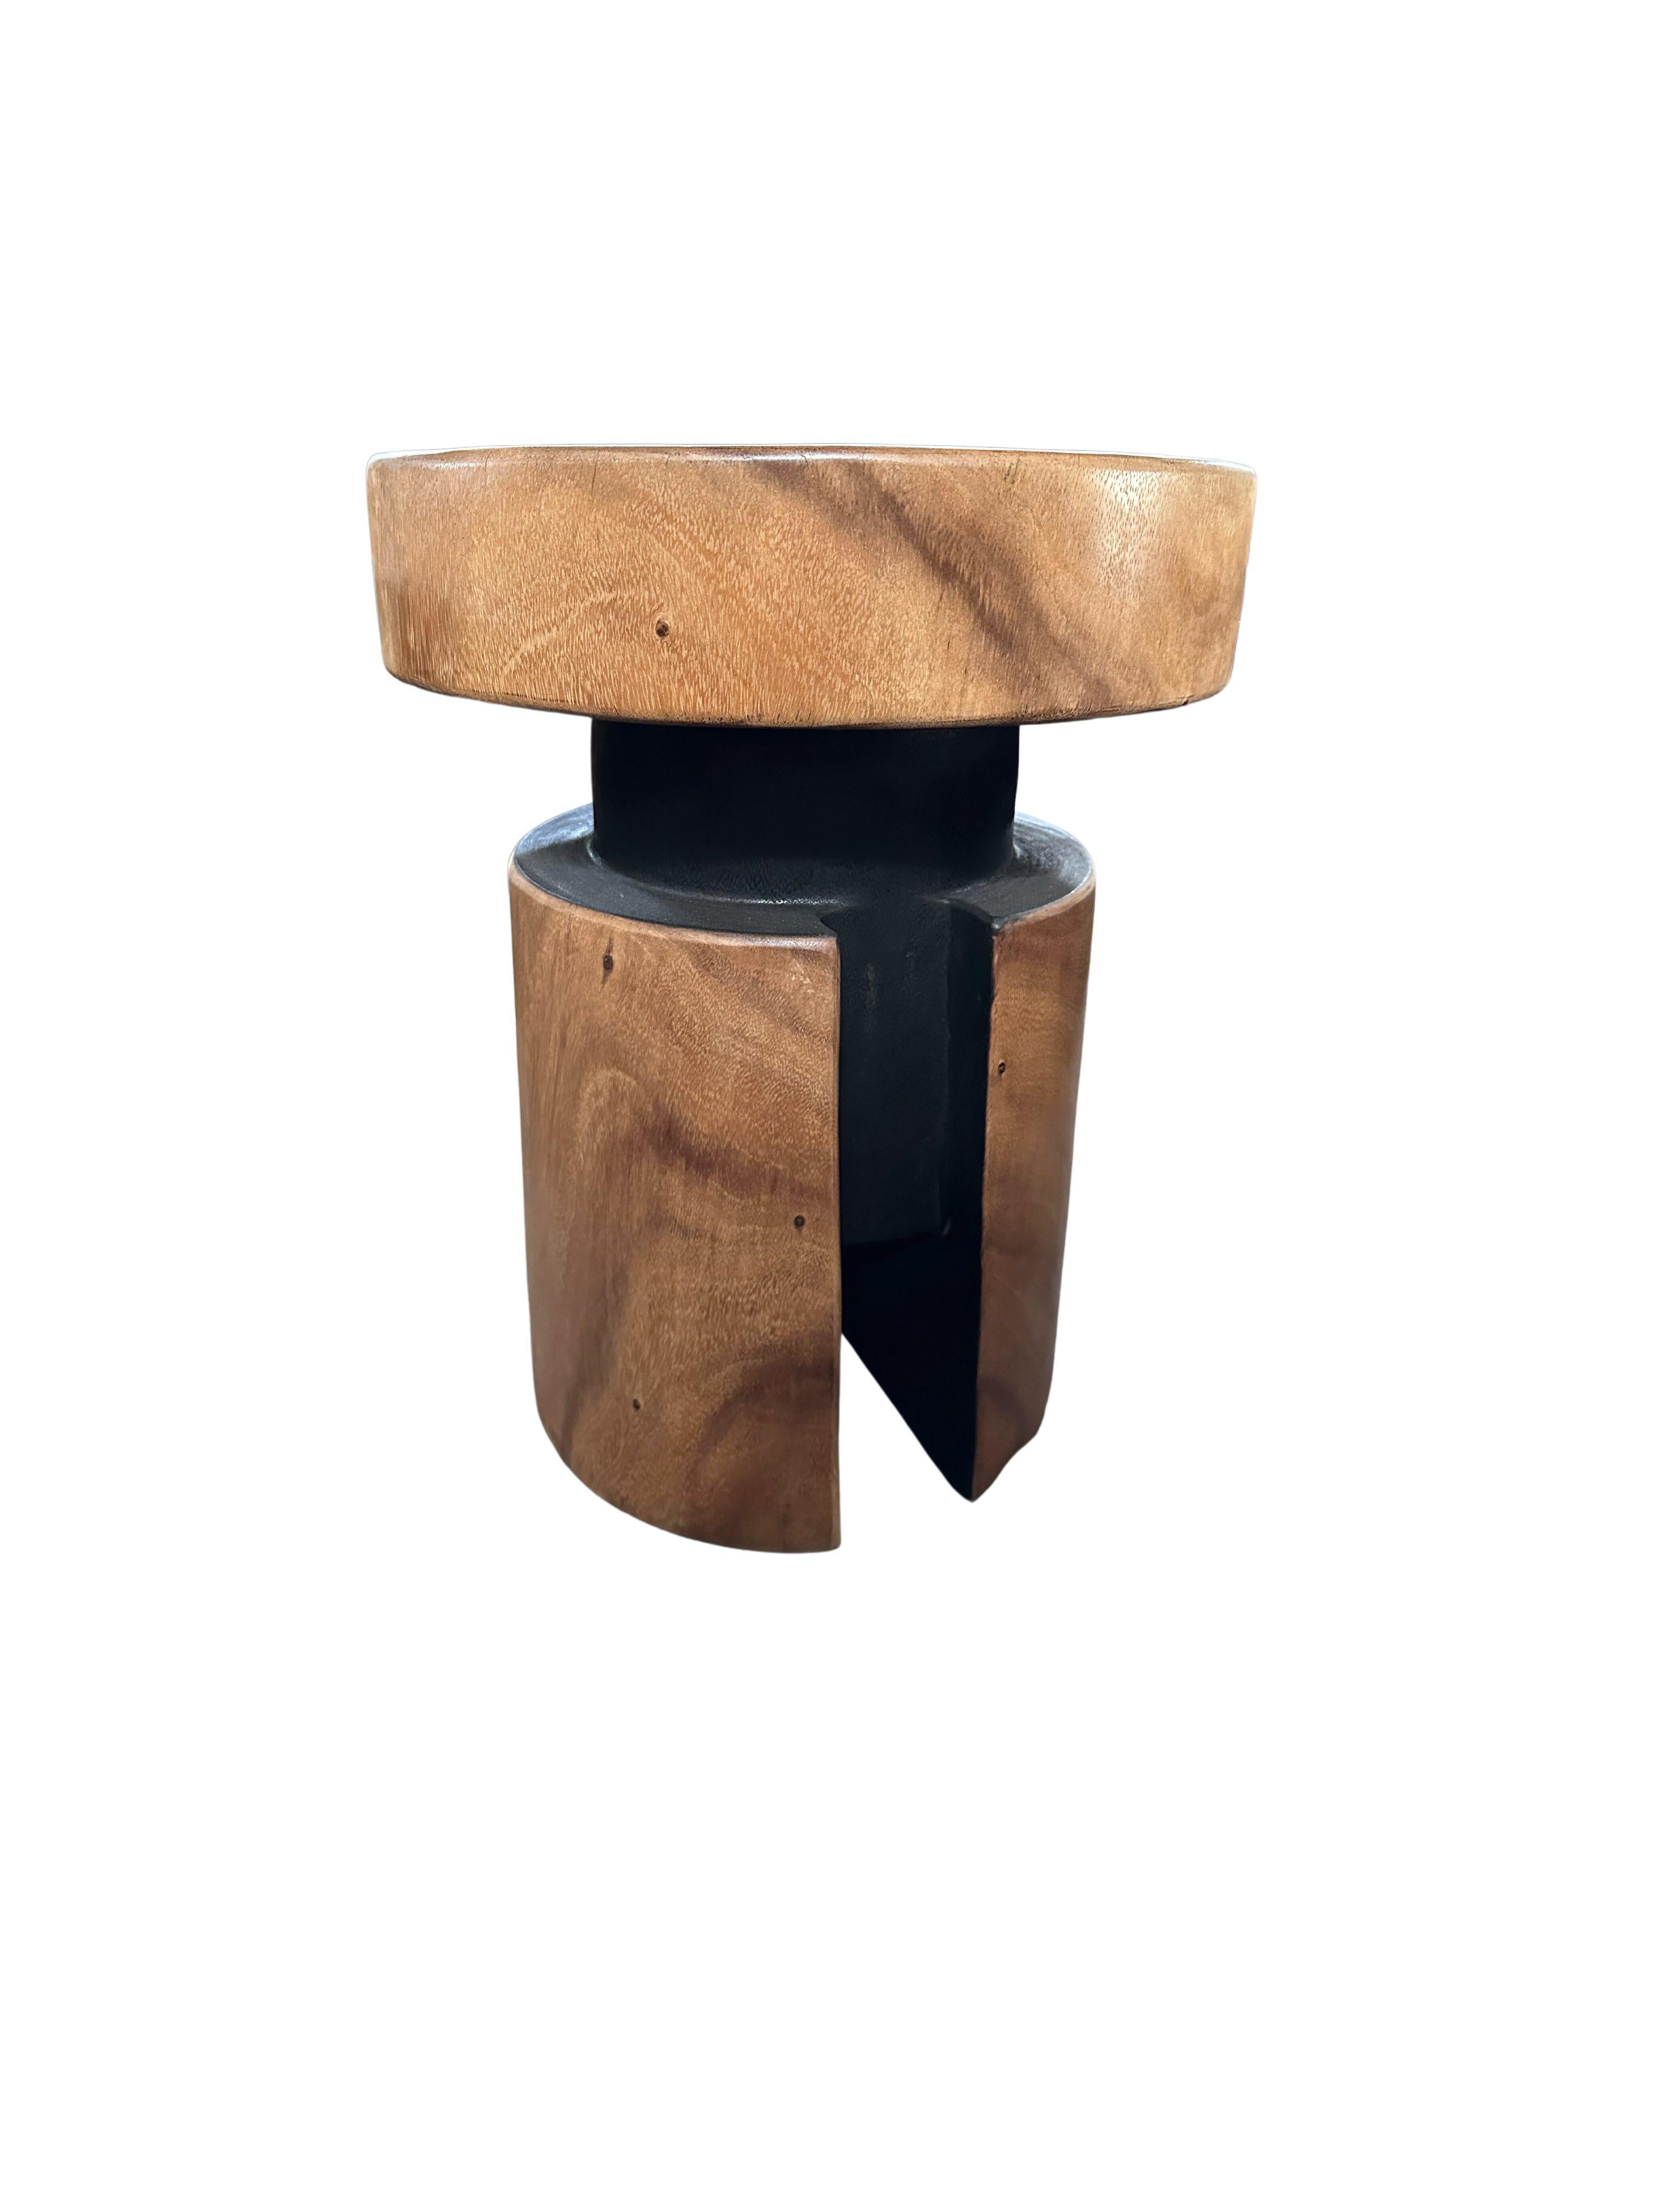 A wonderfully sculptural side table crafted from Suar Wood. Its curved edges and abstract form add to its charm. The perfect object to bring warmth to any space. This table features a carved hole at its base as well as a mix of burnt and natural